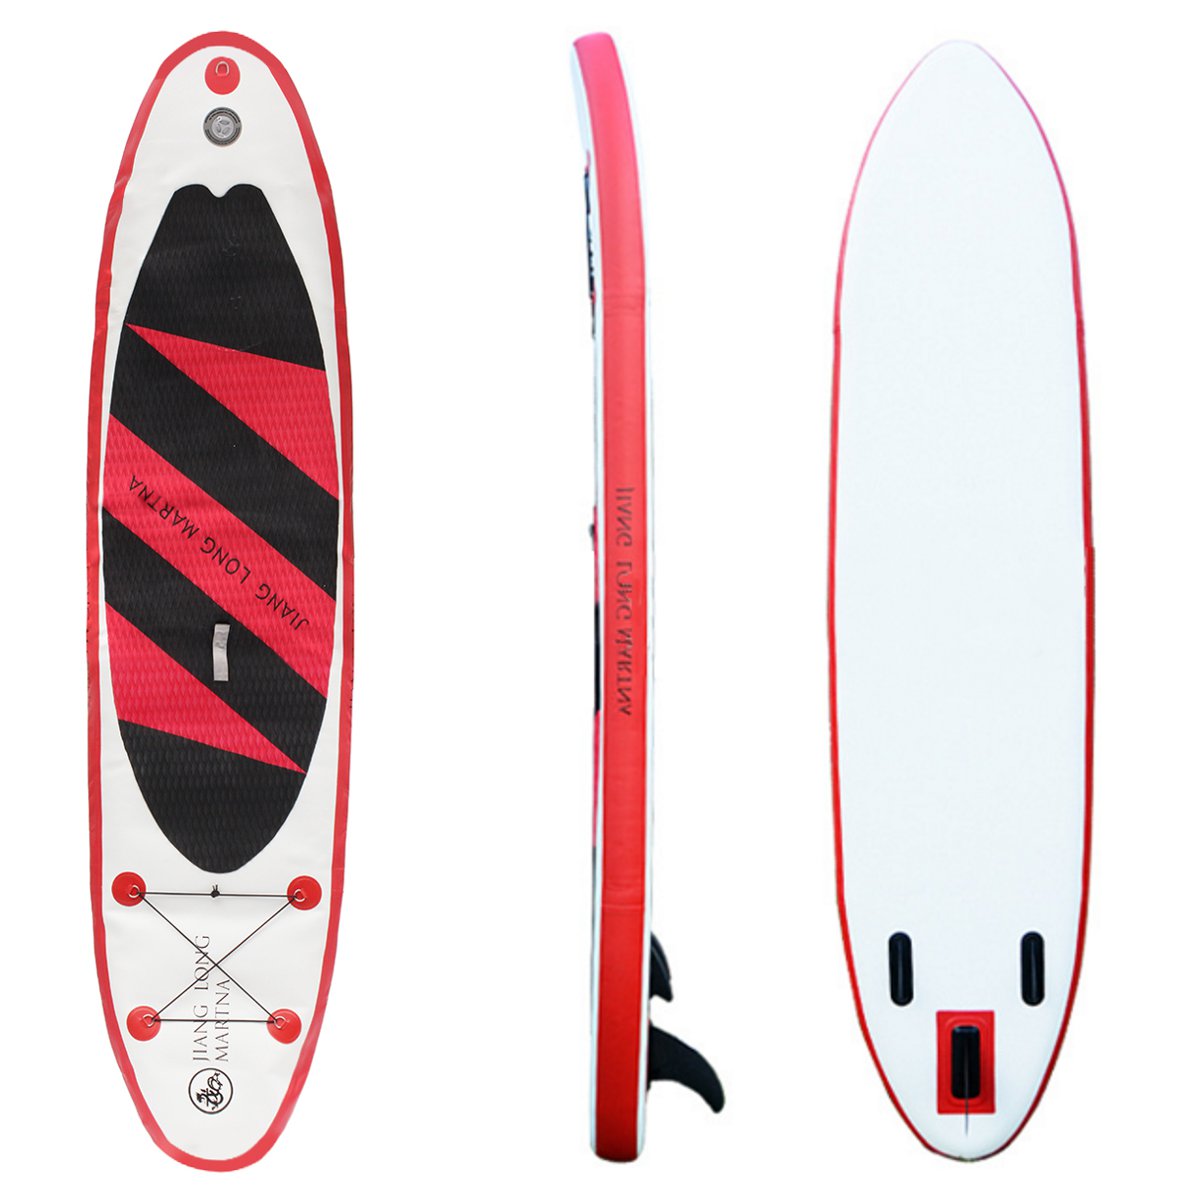 126x315x59-Inch-Inflatable-PVC-Stand-Up-Paddle-Board-Exercise-Training-Surfboard-Paddle-Board-1246897